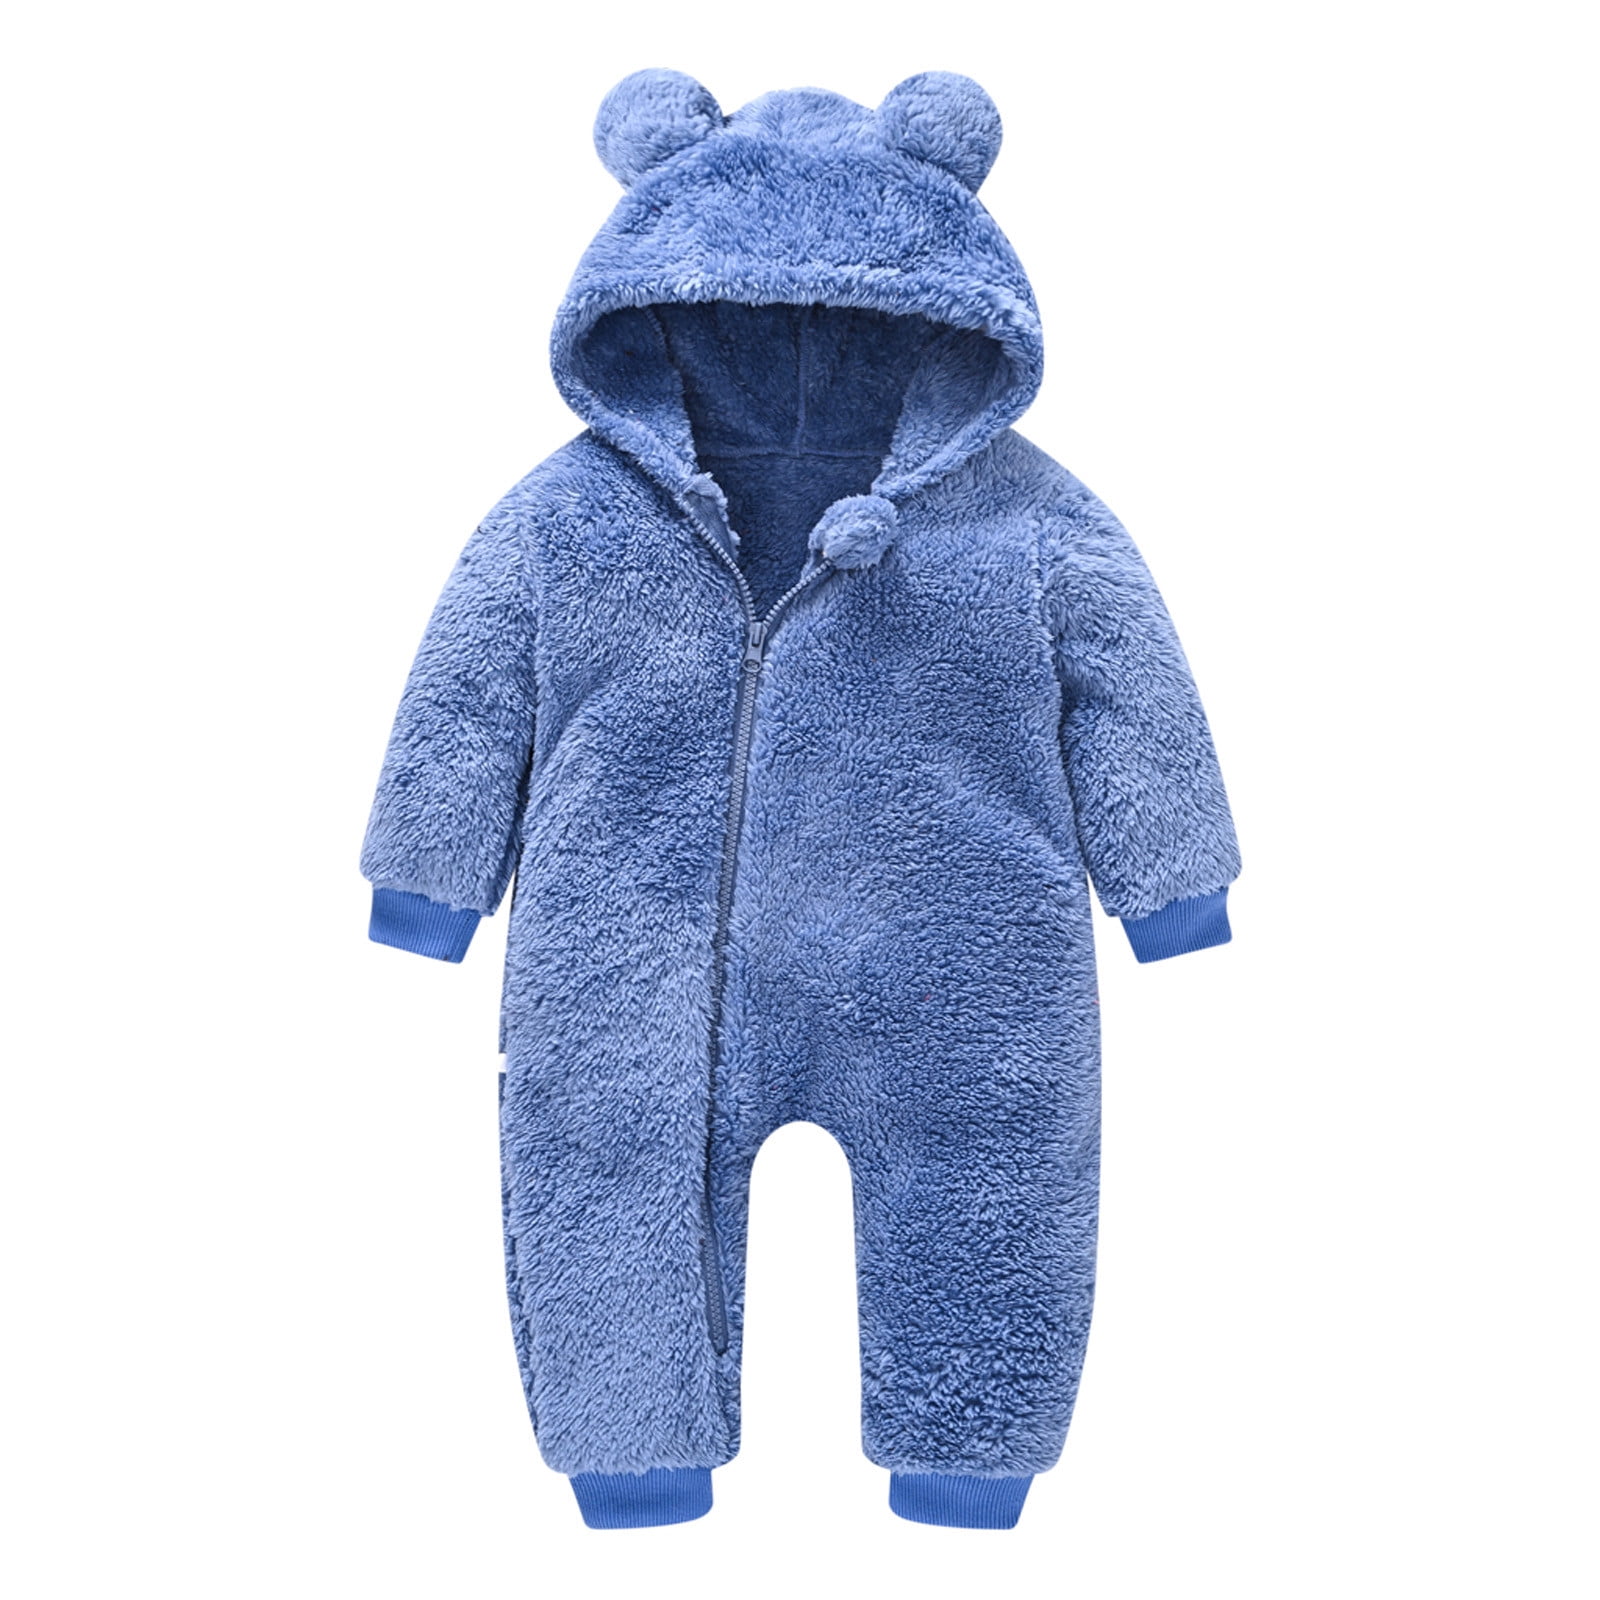 Baby Infant Winter Thick Snowsuit Coat Footed Romper Front Snaps Warm Jumpsuit for Baby Girl Boy Eurobuy Newborn Cartoon Bear Snowsuit